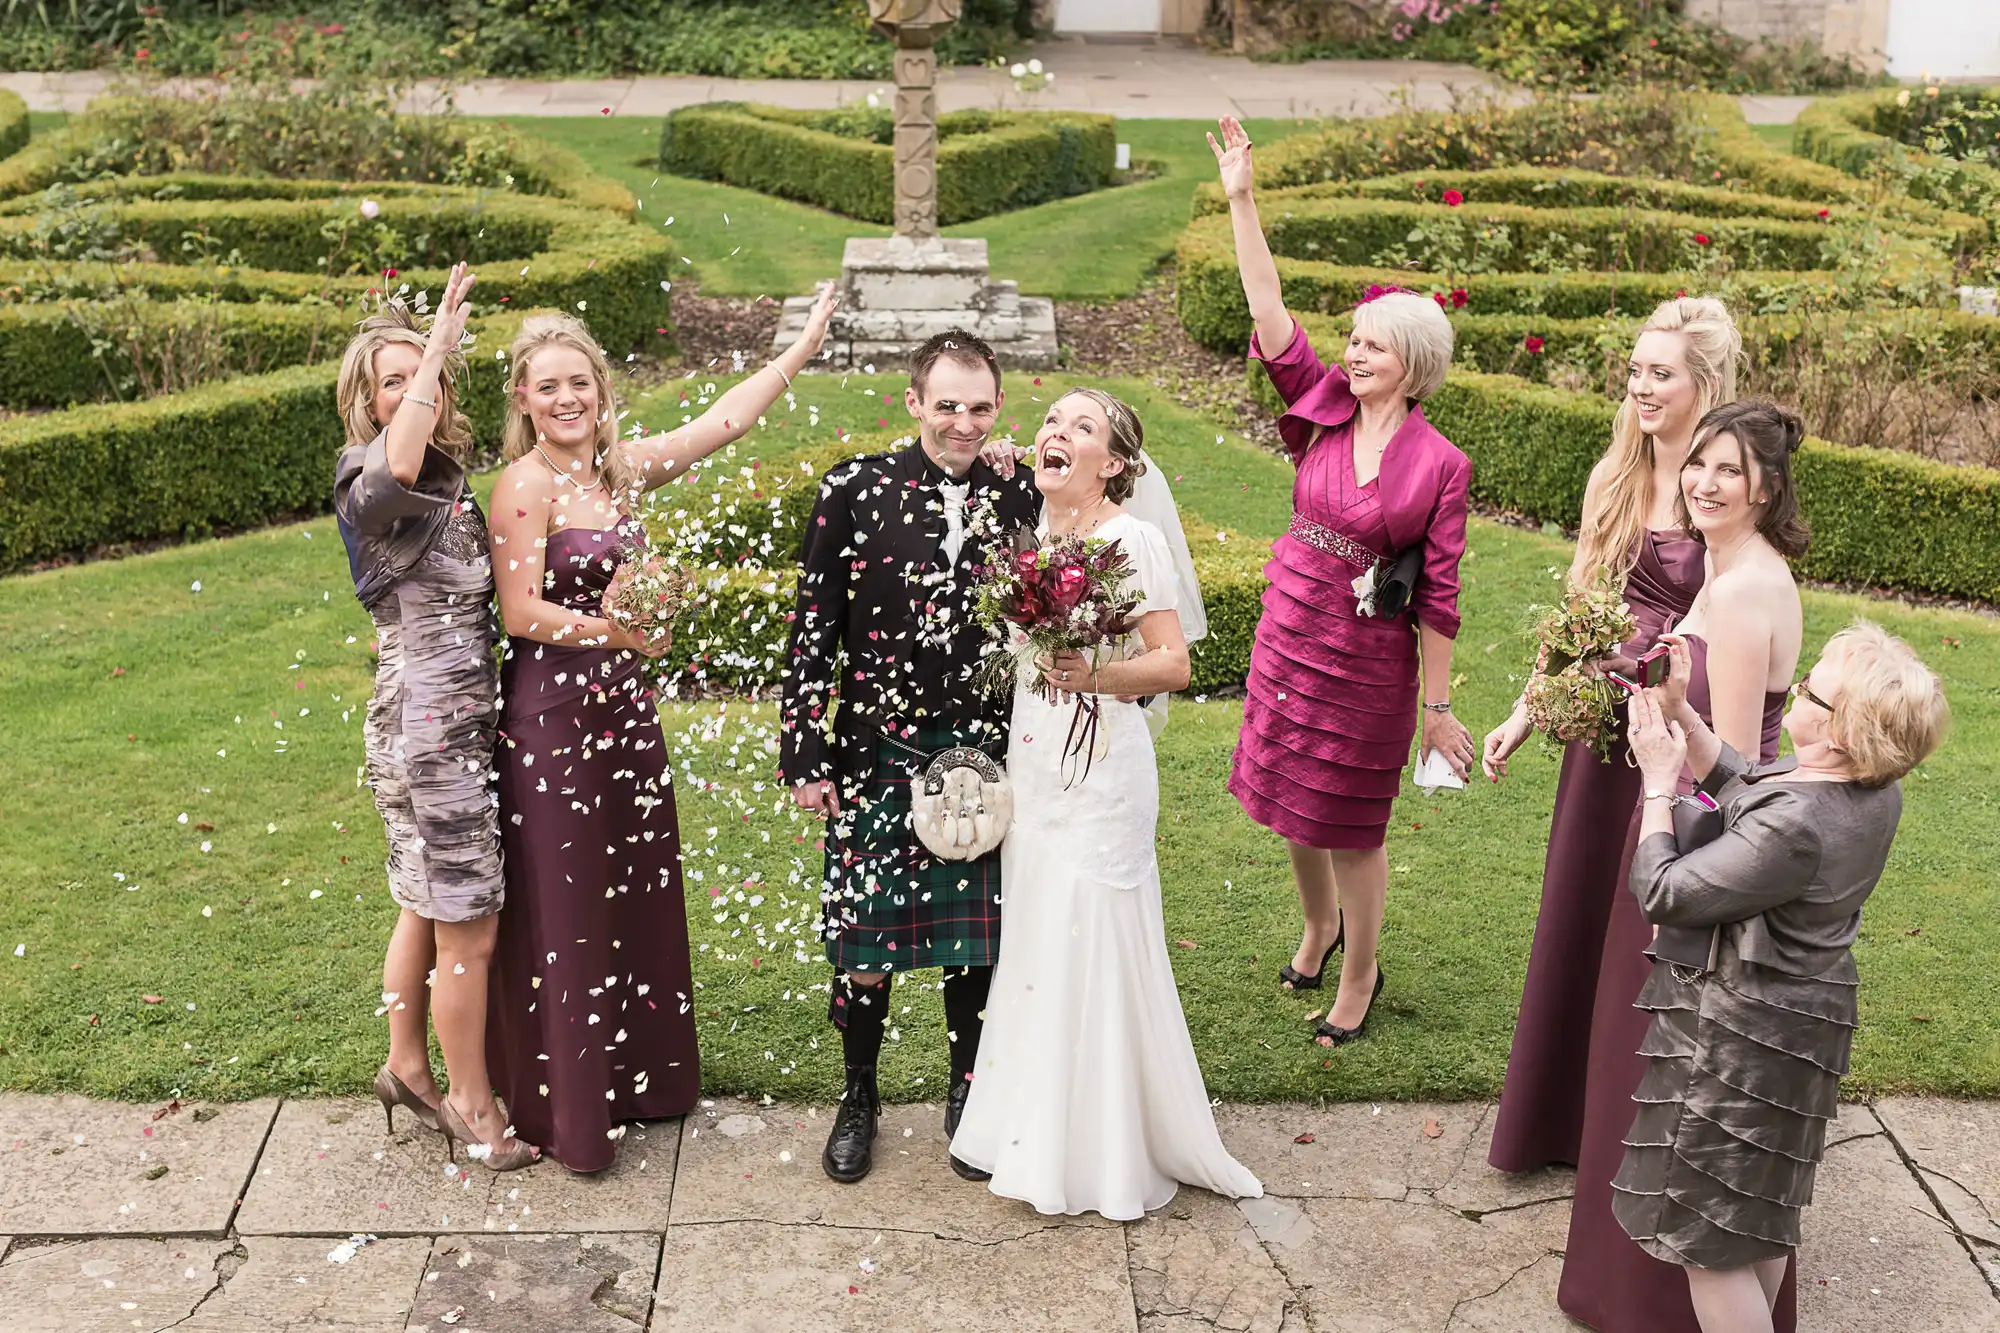 A wedding party joyfully throwing flower petals at a newlywed couple in a garden, with guests smiling and celebrating.